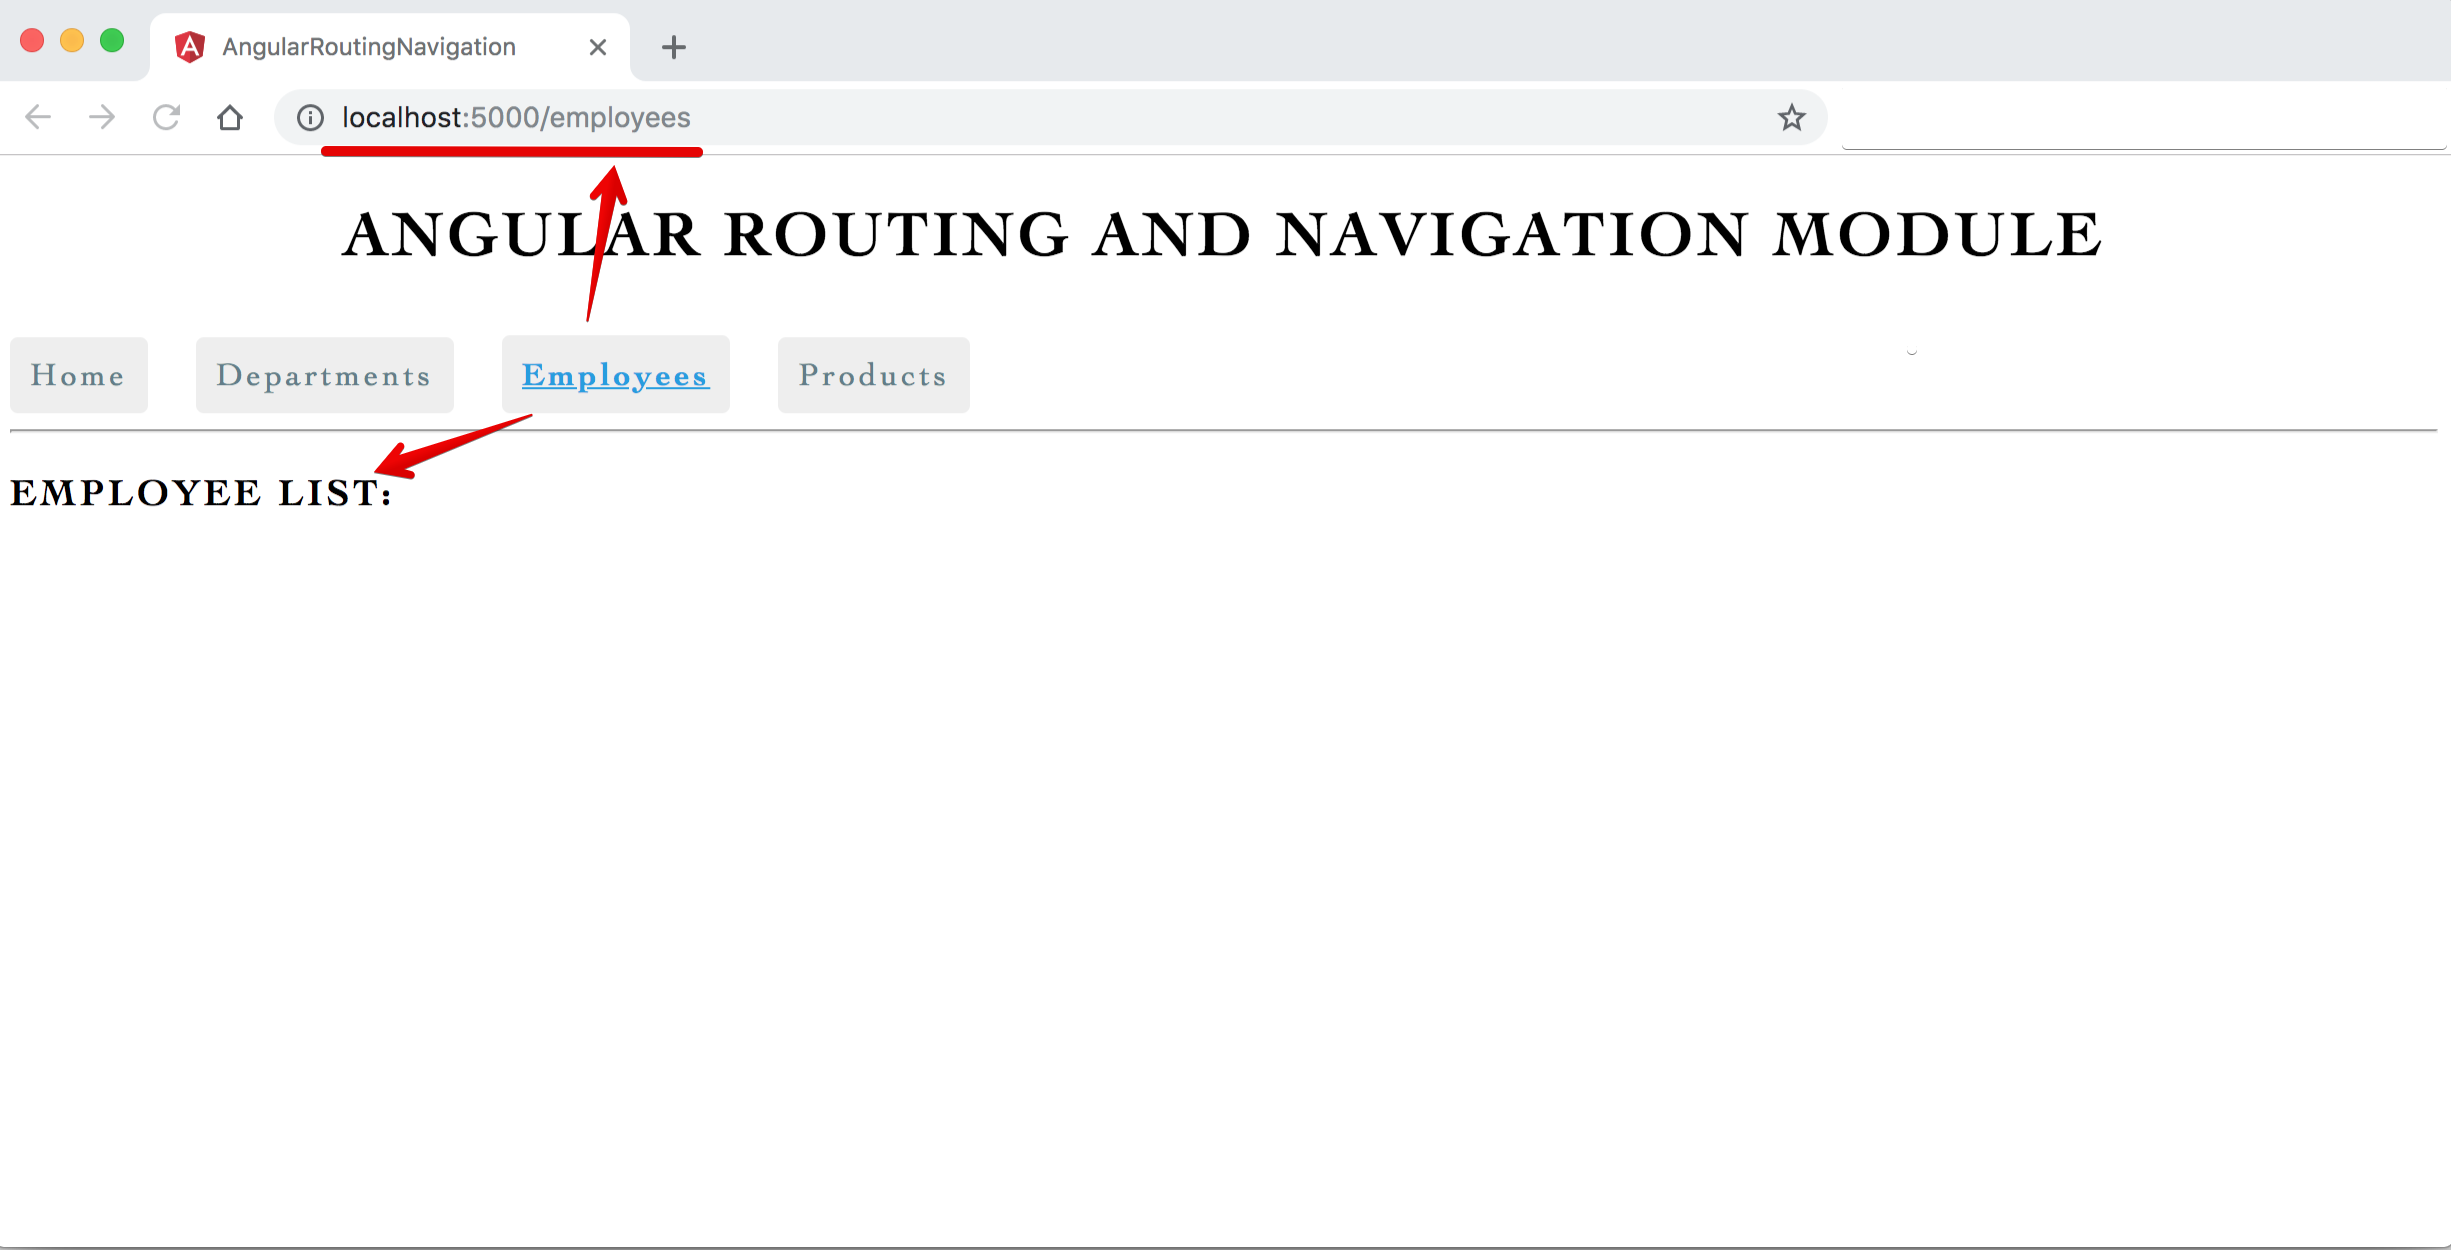 Image - Output - Angular Single Page Application (SPA) with Routing Navigation - Employees View